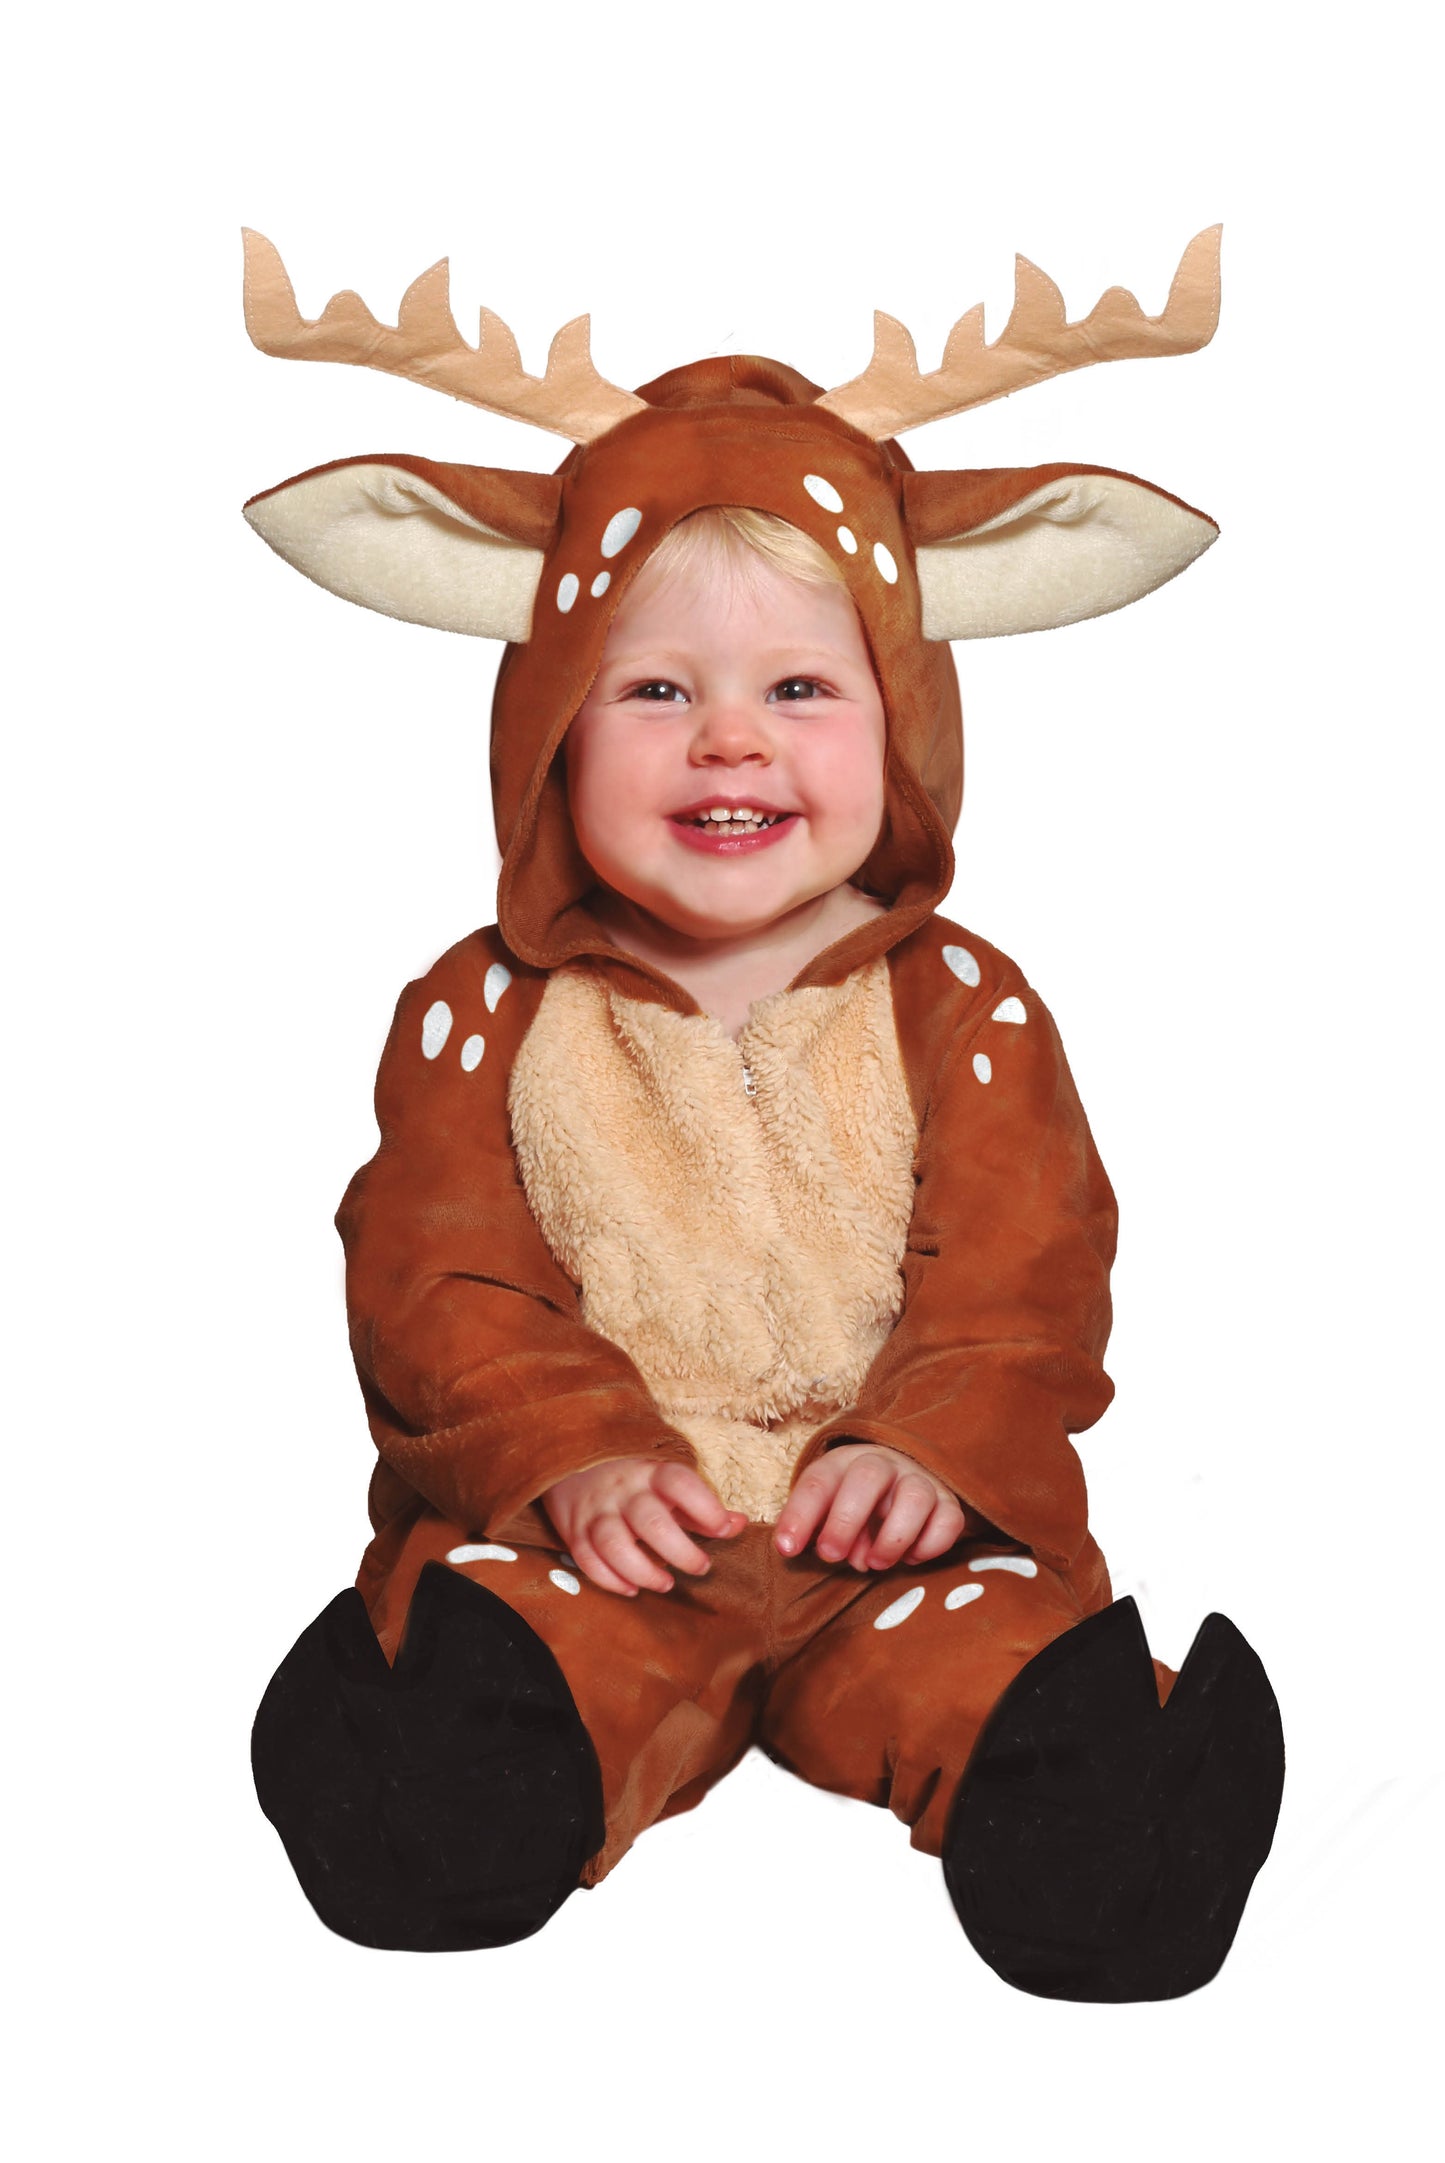 Baby Reindeer Costume includes jumpsuit with hood